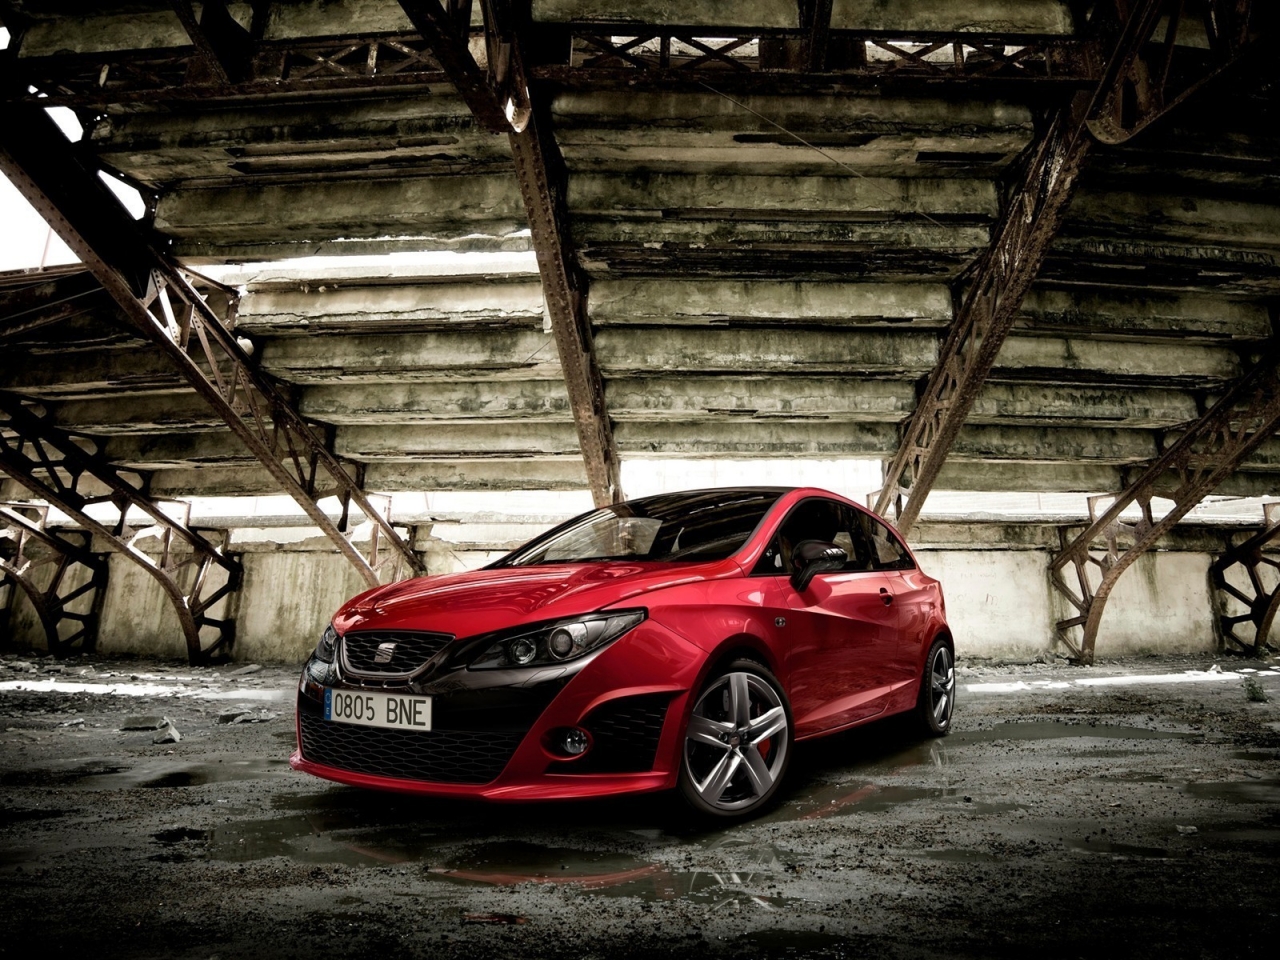 Seat Ibiza Coupe Tunning for 1280 x 960 resolution